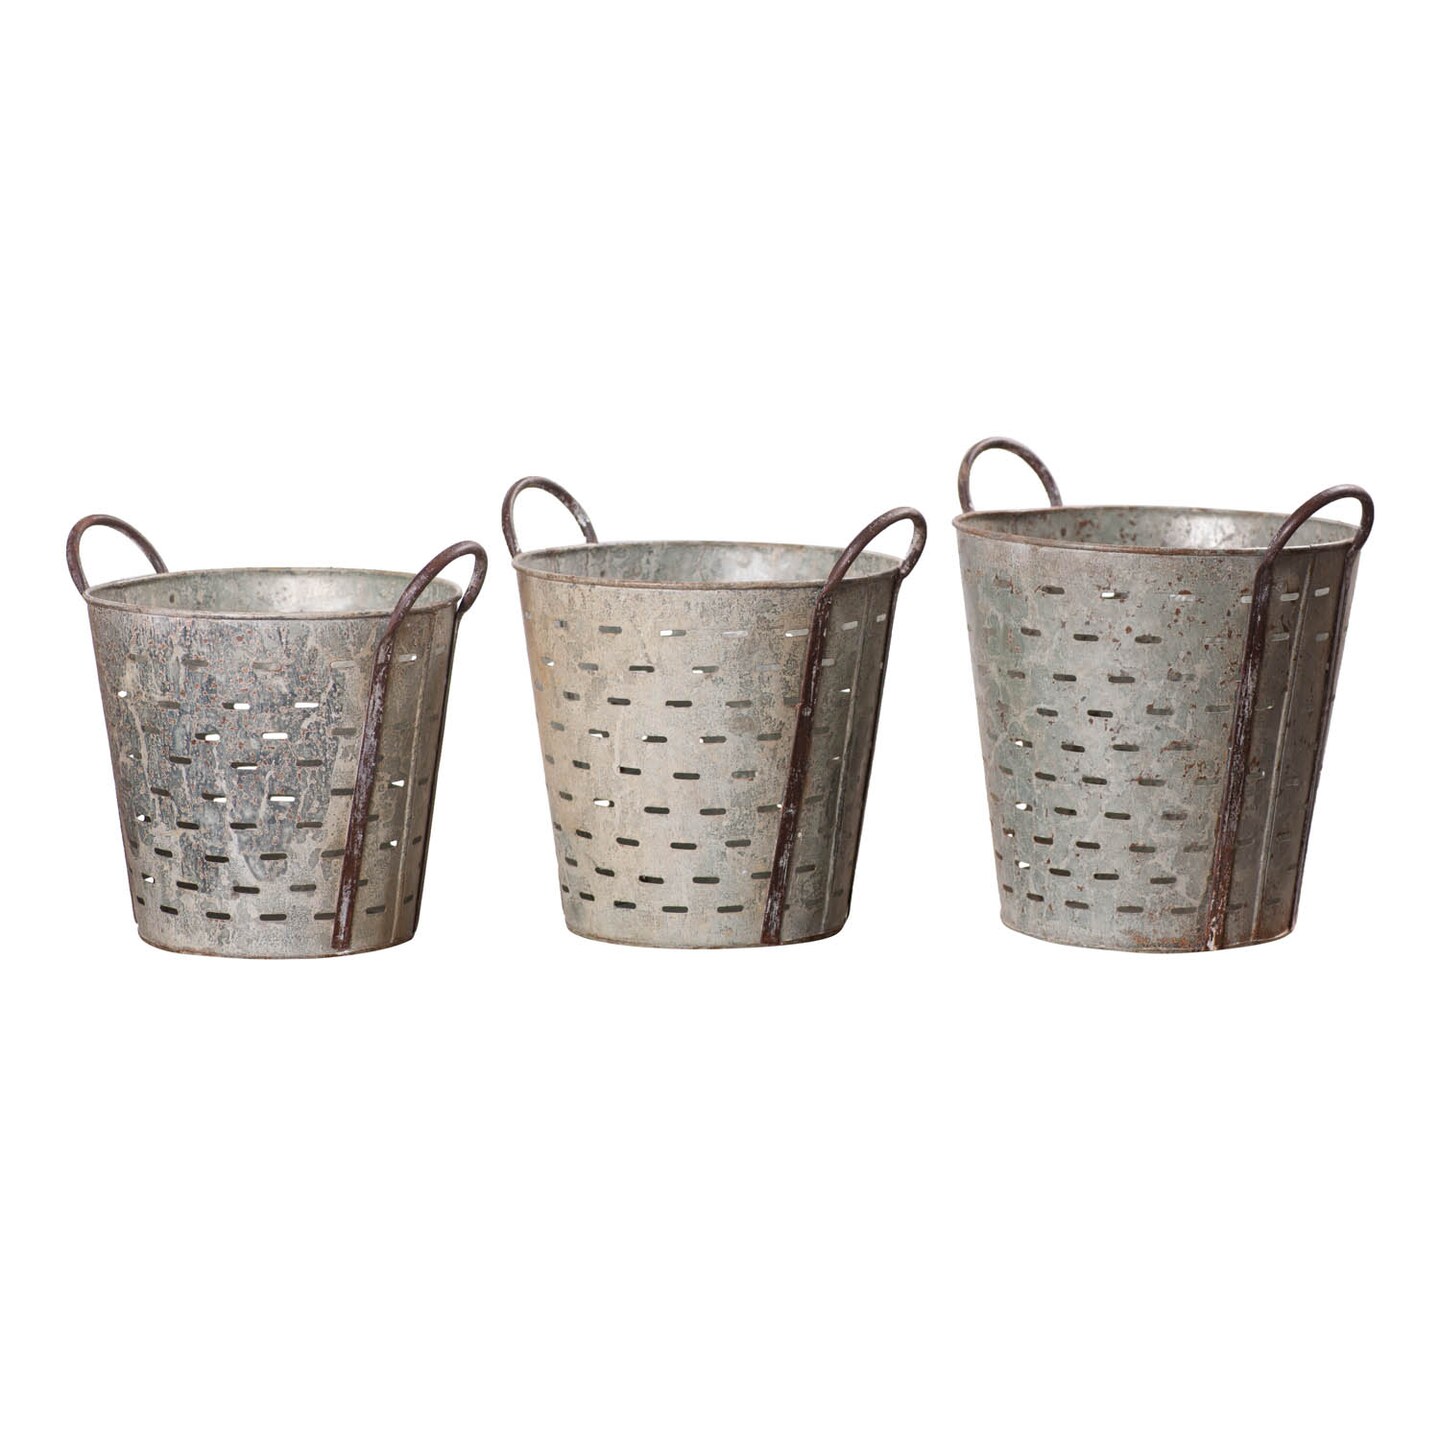 Irvins Country Tinware Olive Bucket Set